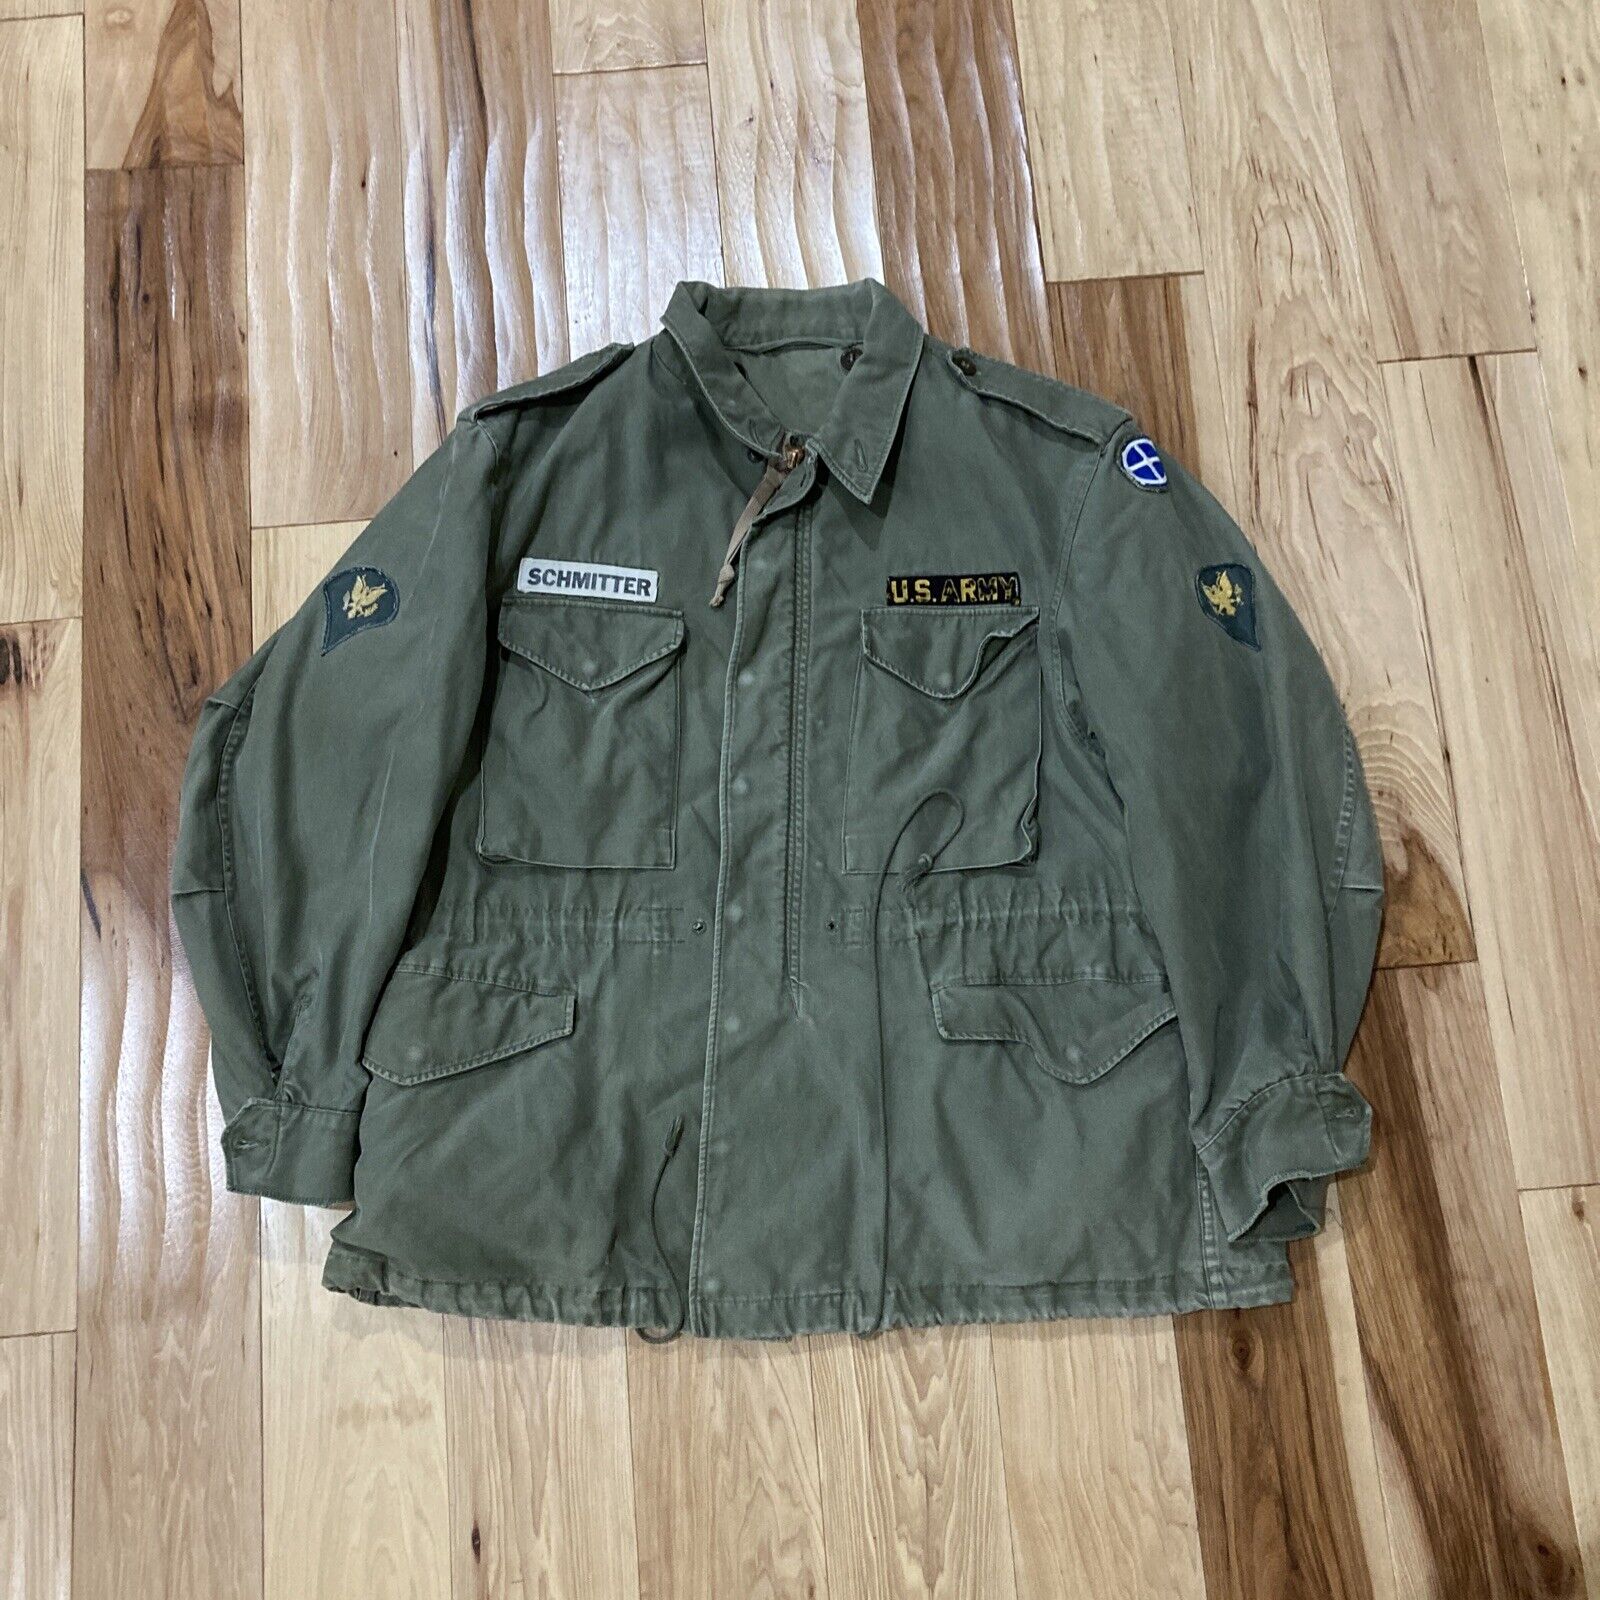 US Army M-51 Field Jacket OG-107 35th Infantry Division patched for ...